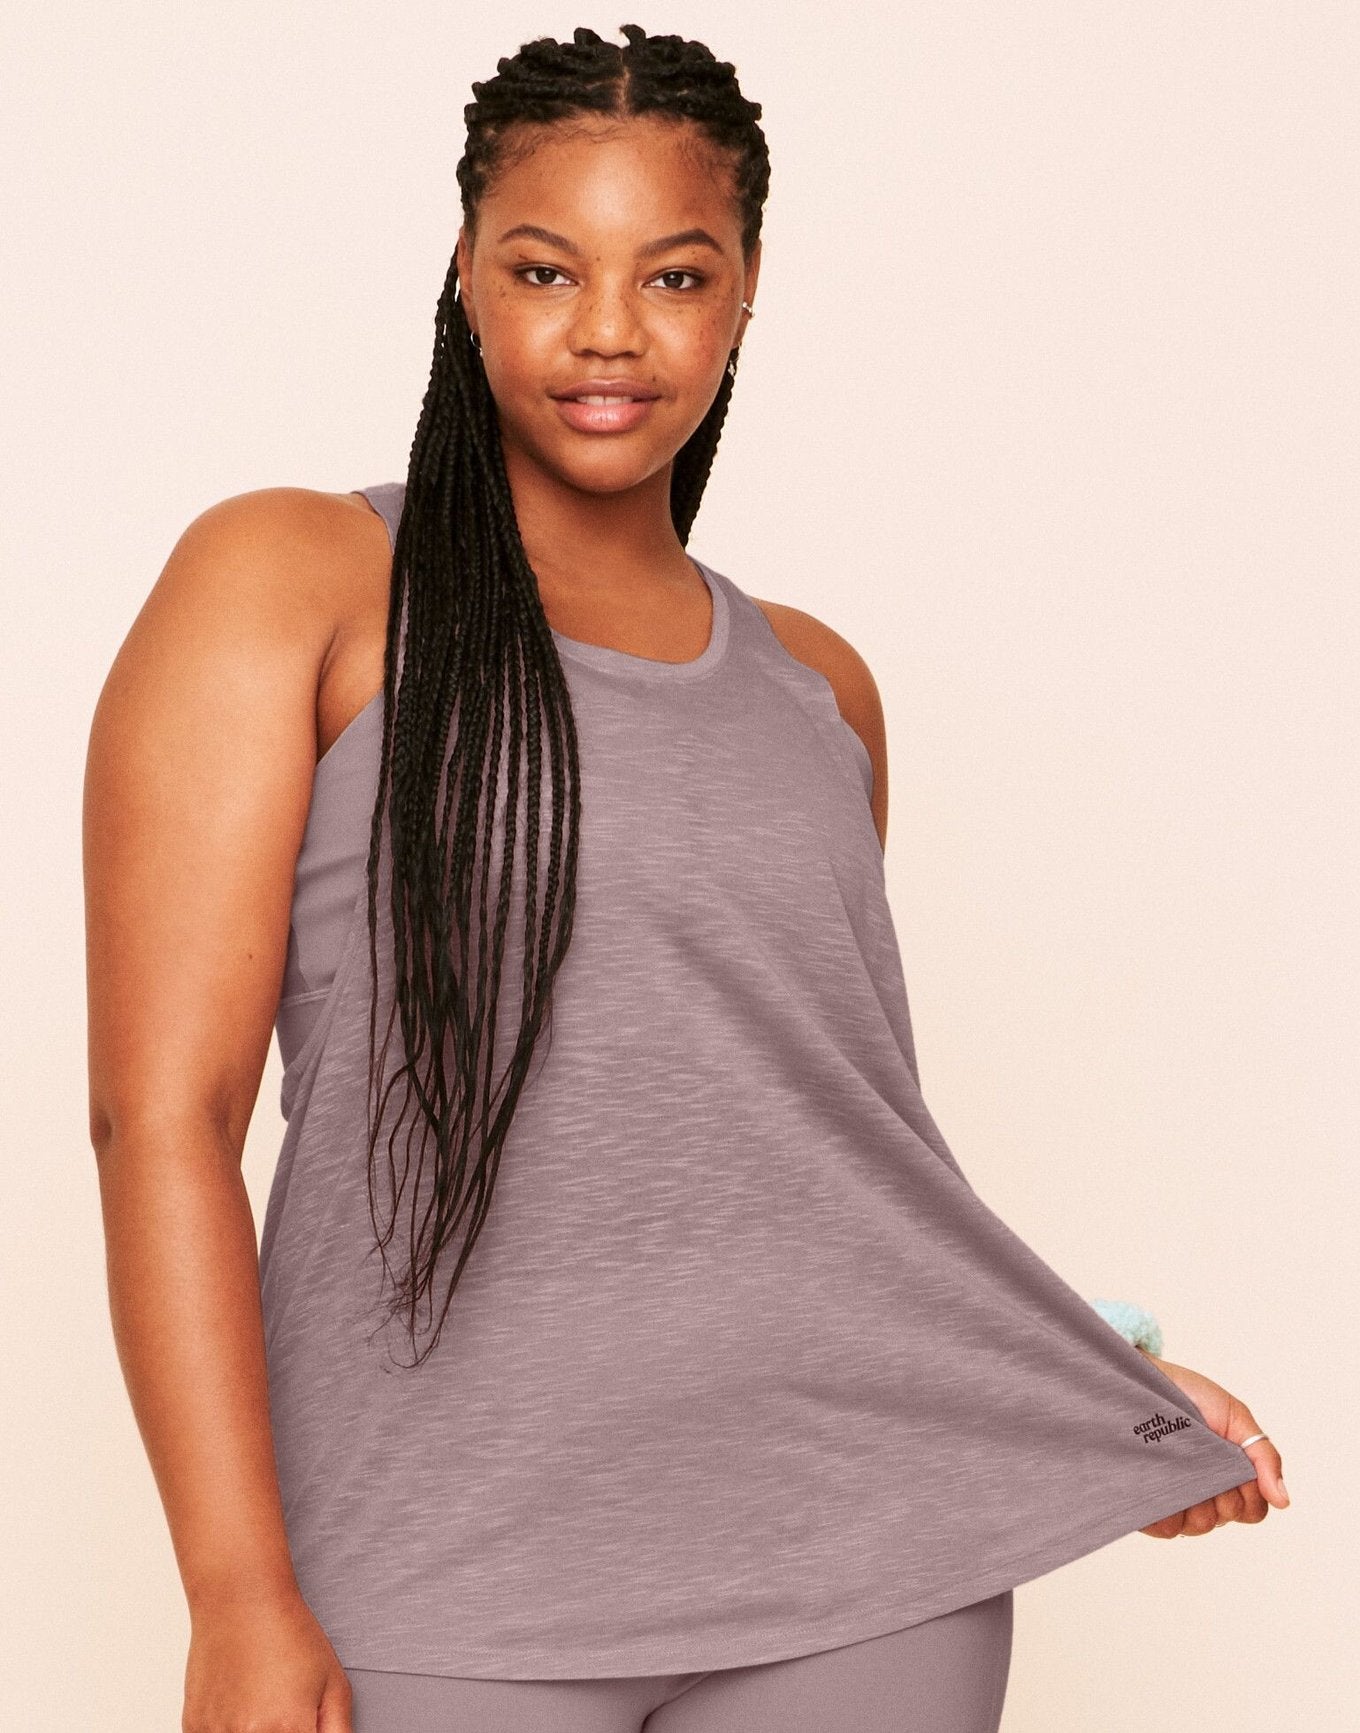 Earth Republic Emmaline Dropped Armhole Tank Workout Tank in color Deauville Mauve and shape tank